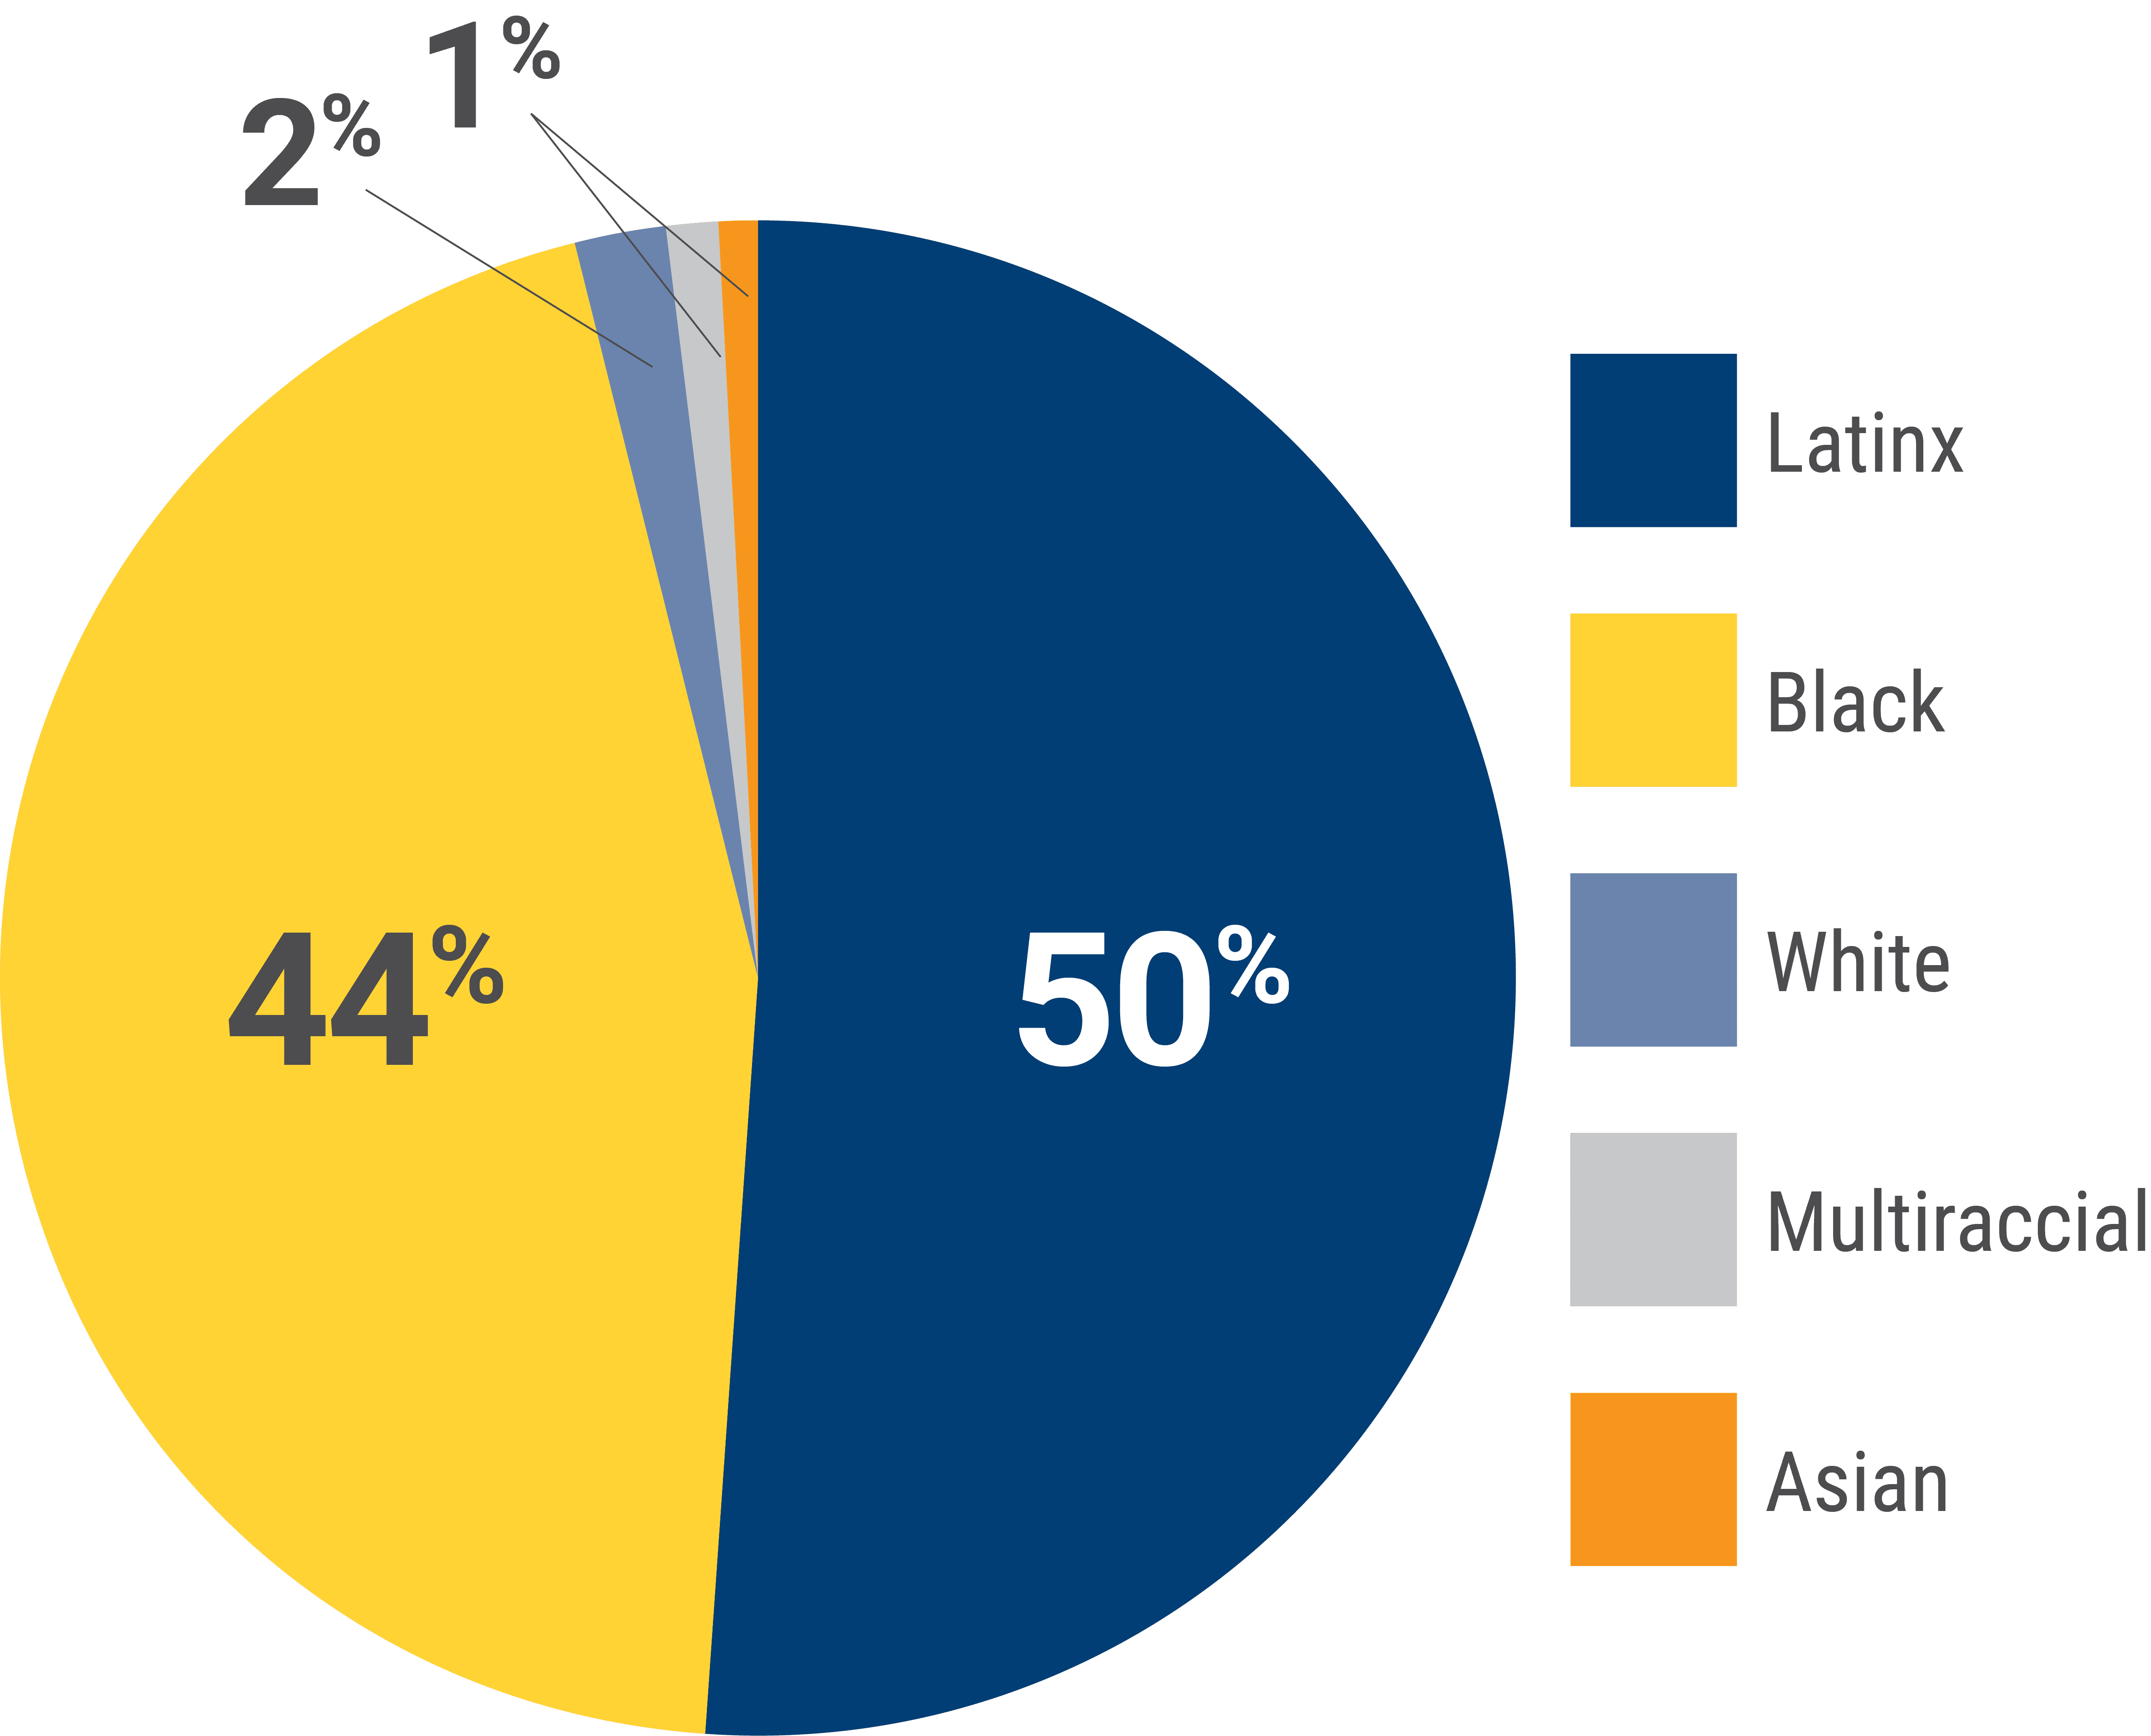 Pie chart shows percentages of respondents based on their race/ethnicity: 49% Latinx, 44% Black, 1% Multiracial, 2% White and 1% Asian